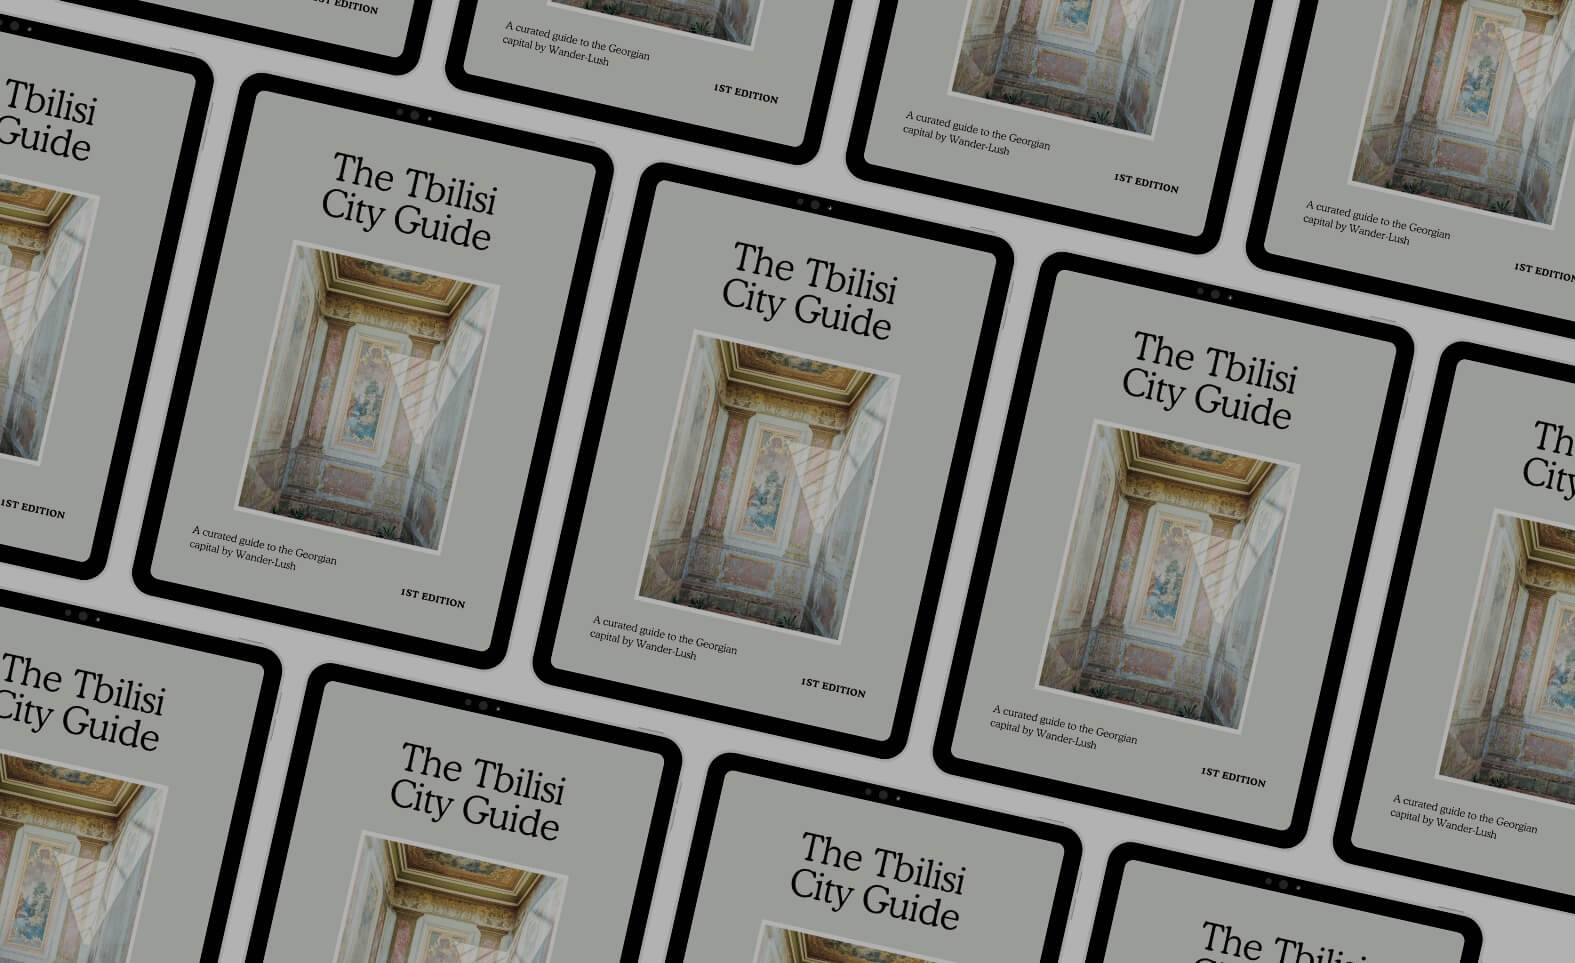 Digital copies of The Tbilisi City Guide, a new travel guidebook for Tbilisi, Georgia.